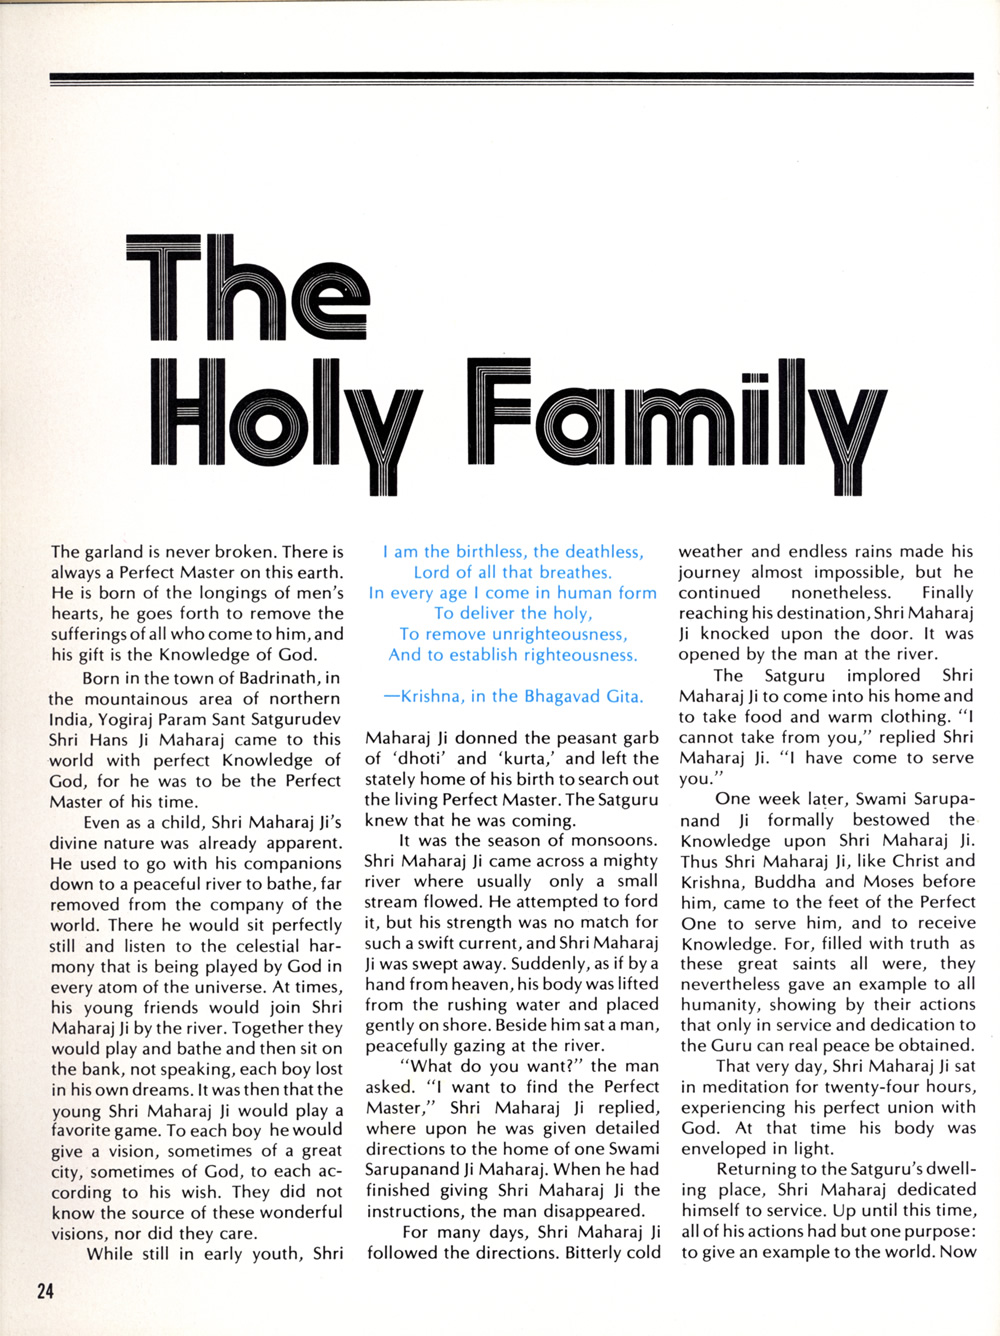 page24_Holy_Family.jpg 414.3K